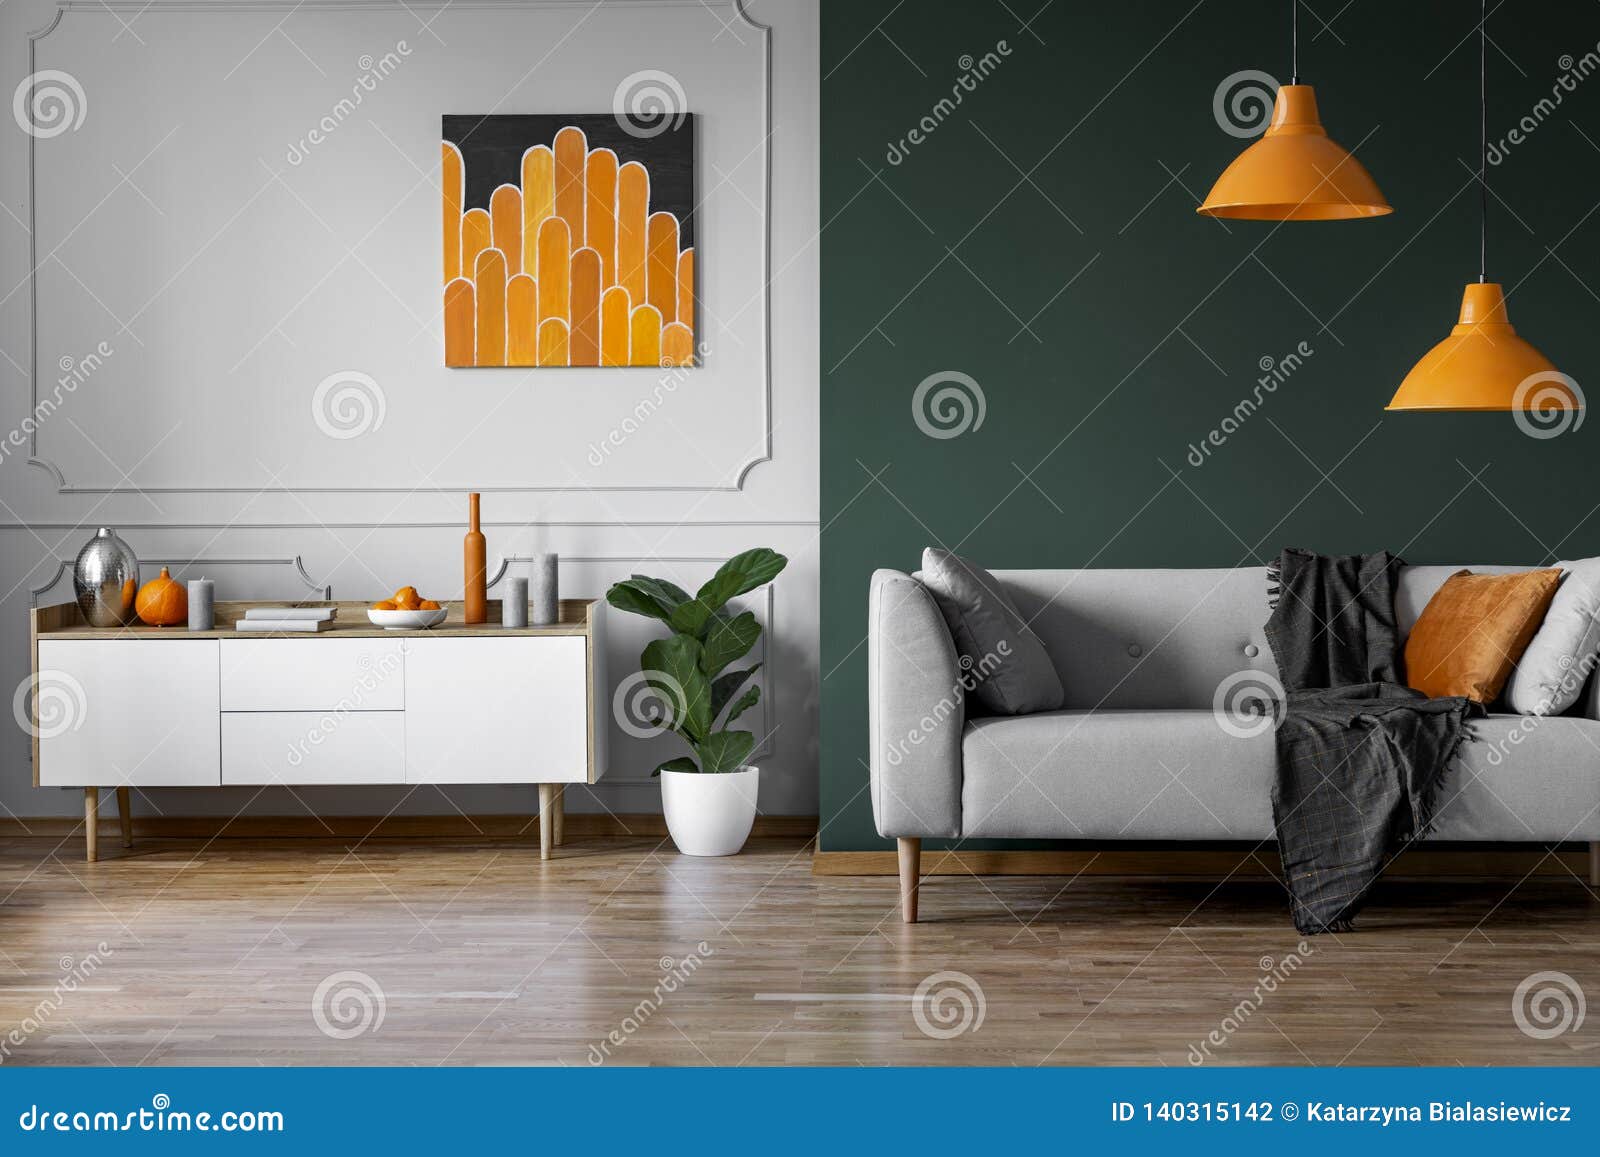 abstract orange painting on grey wall of stylish living room interior with white wooden furniture and grey couch